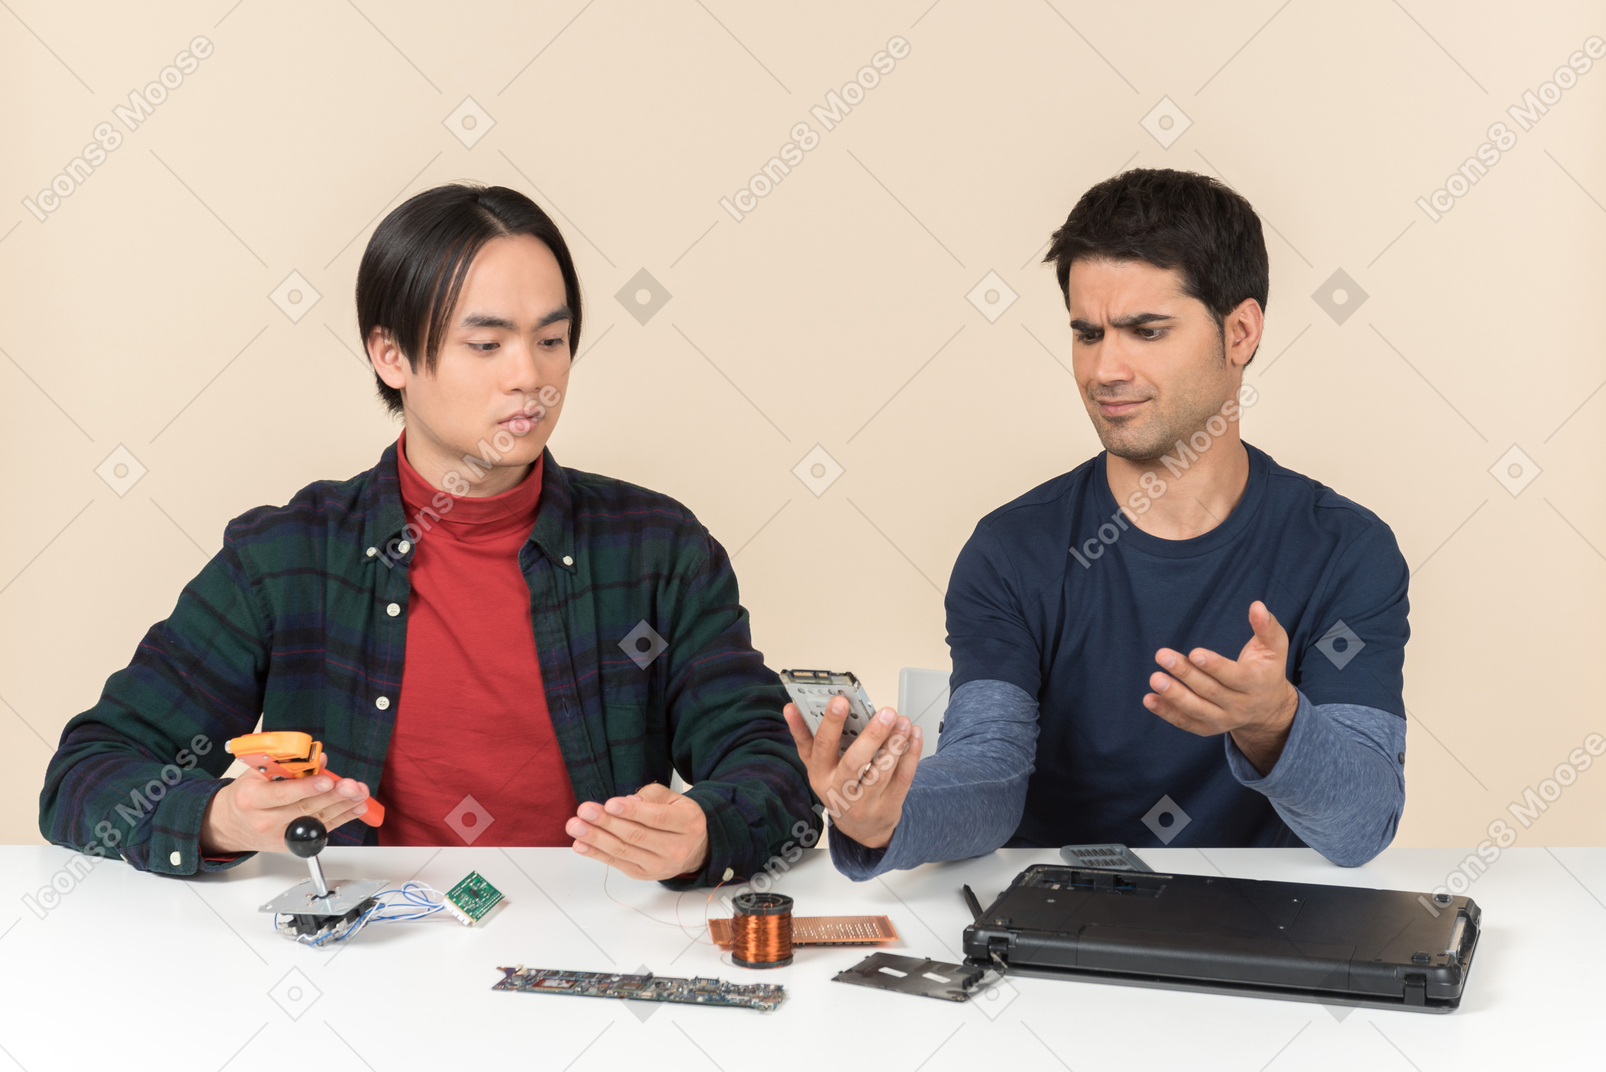 Two young geeks sitting at the table and fixing laptop